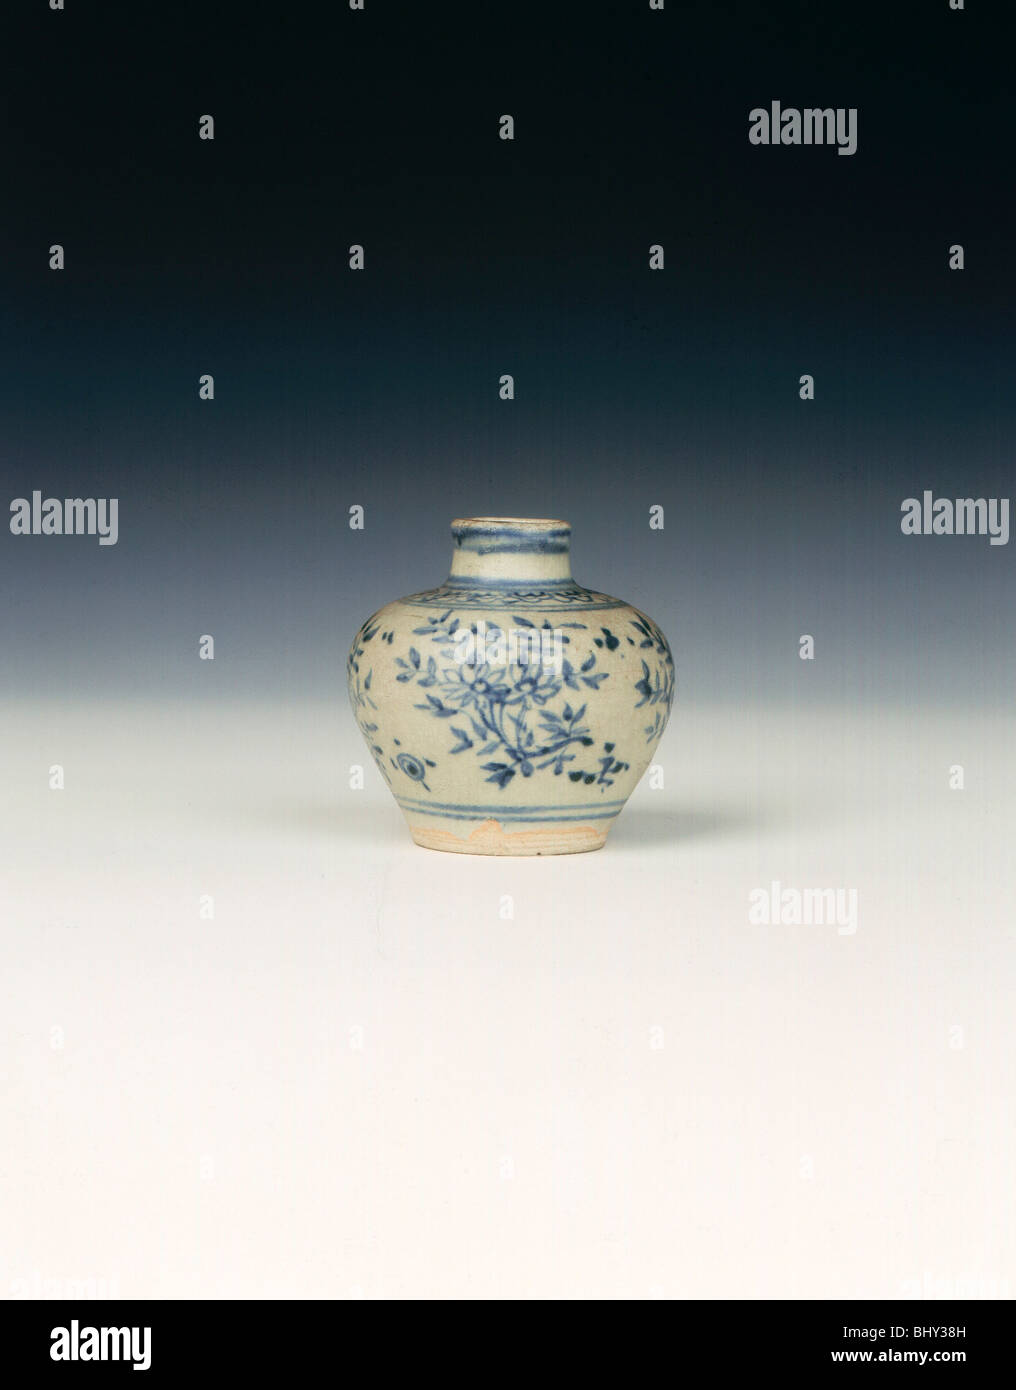 Miniature blue and white guan jar, Ming dynasty, China, second half of 15th century. Artist: Unknown Stock Photo